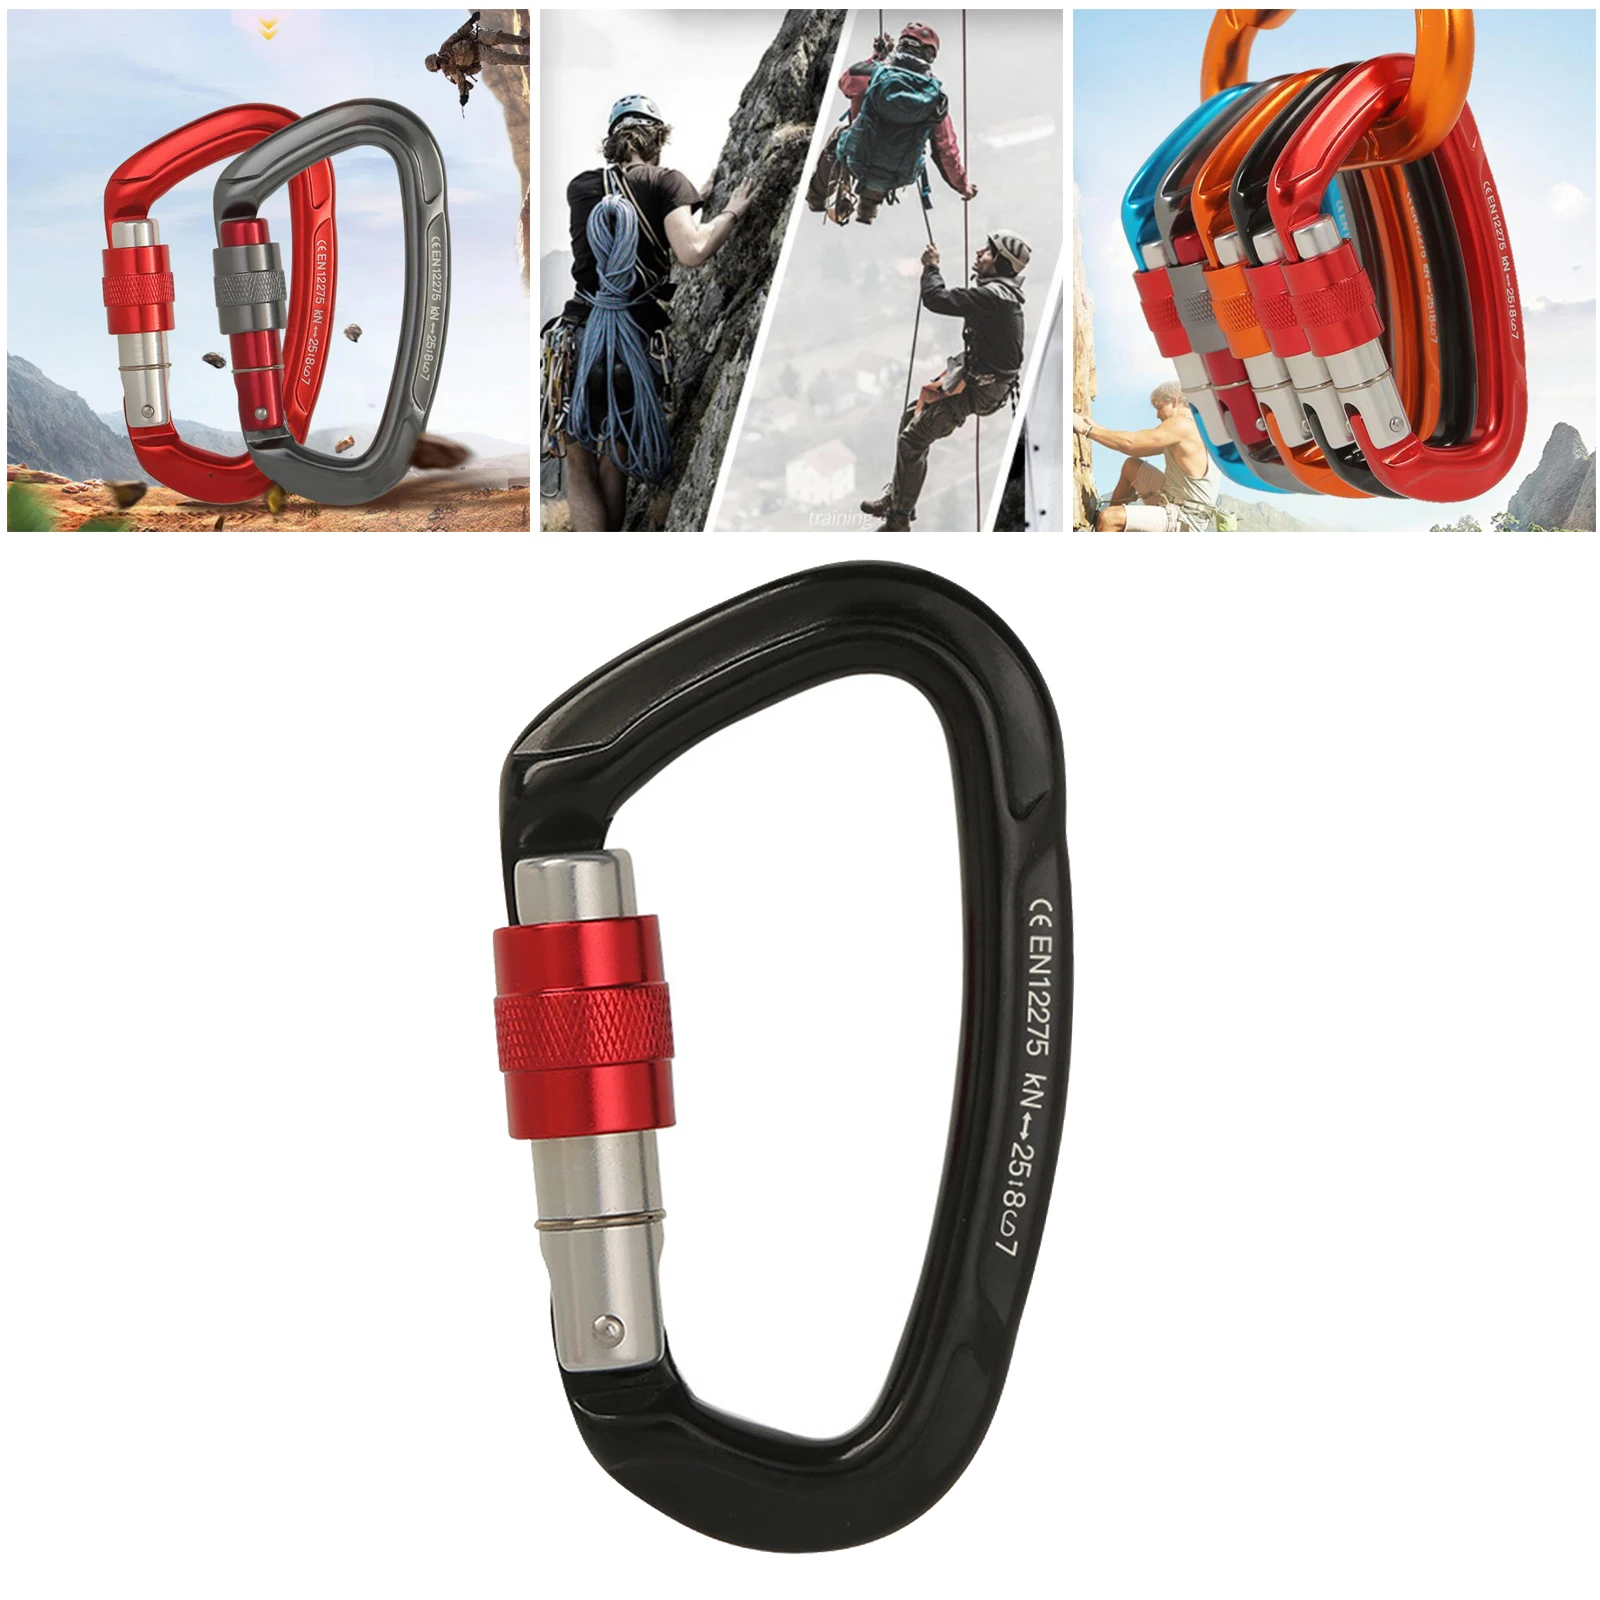 Climbing Carabiner Clips D-shape Carabiners Dog Leash Rescuing Safety Gear